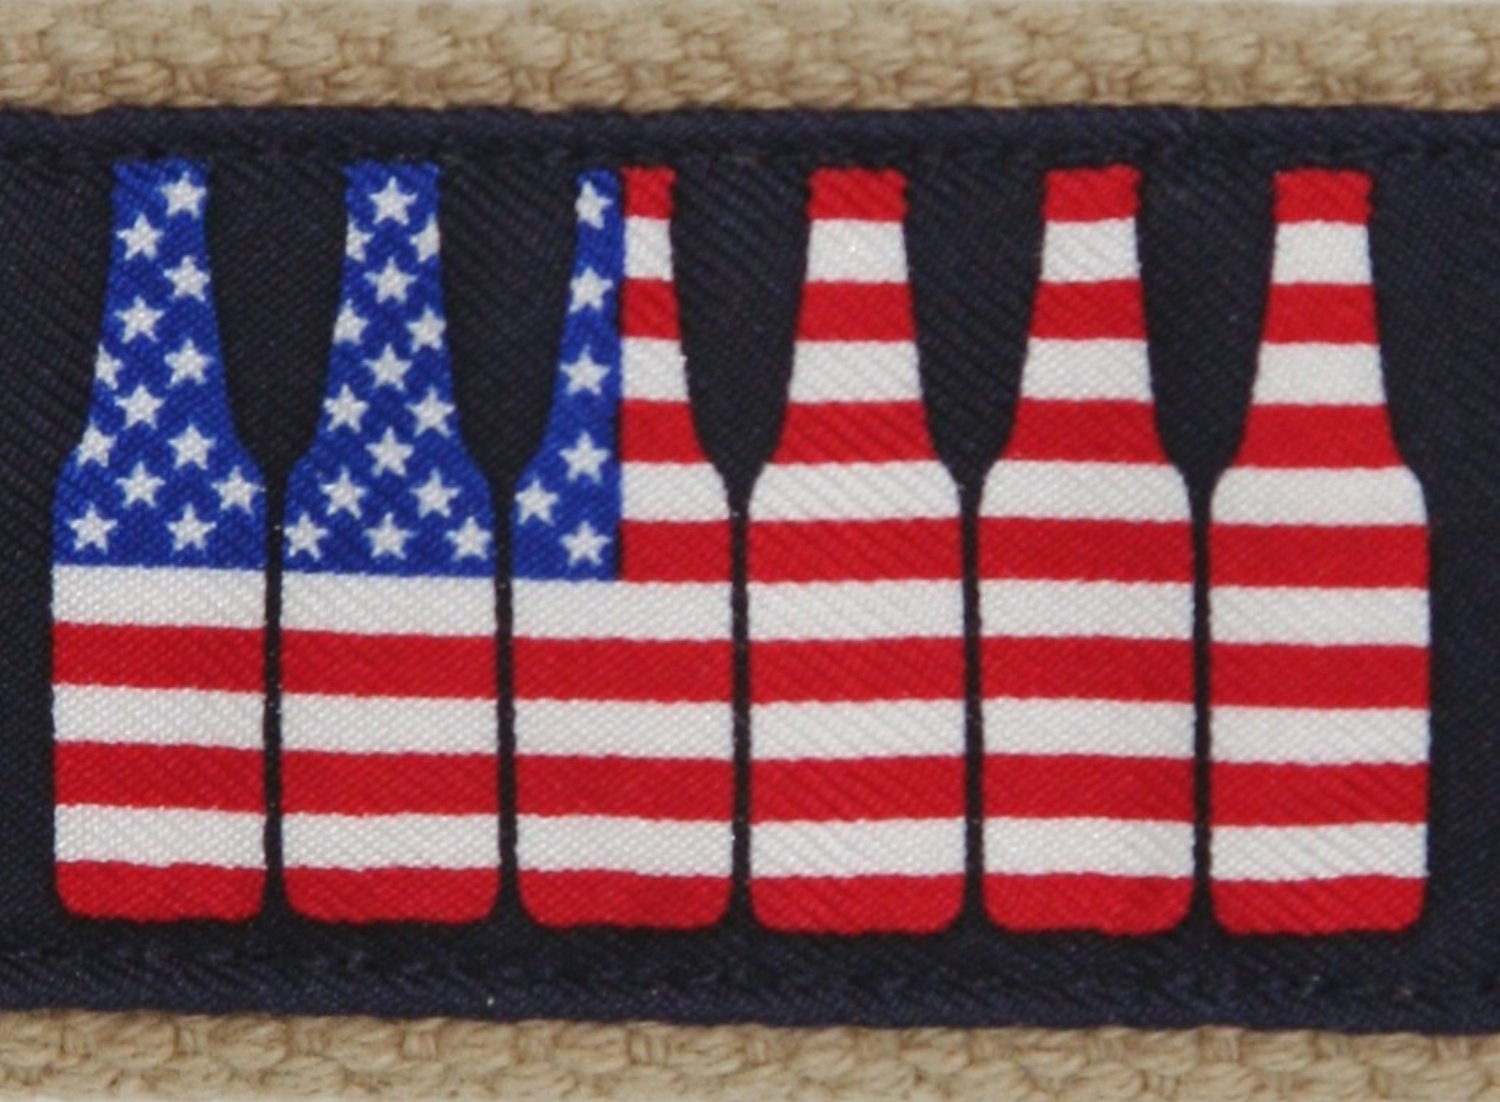 Close-up of American flag stars and stripes 6 pack of beer motif.  Preppy and patriotic styling similar to Vineyard Vines.